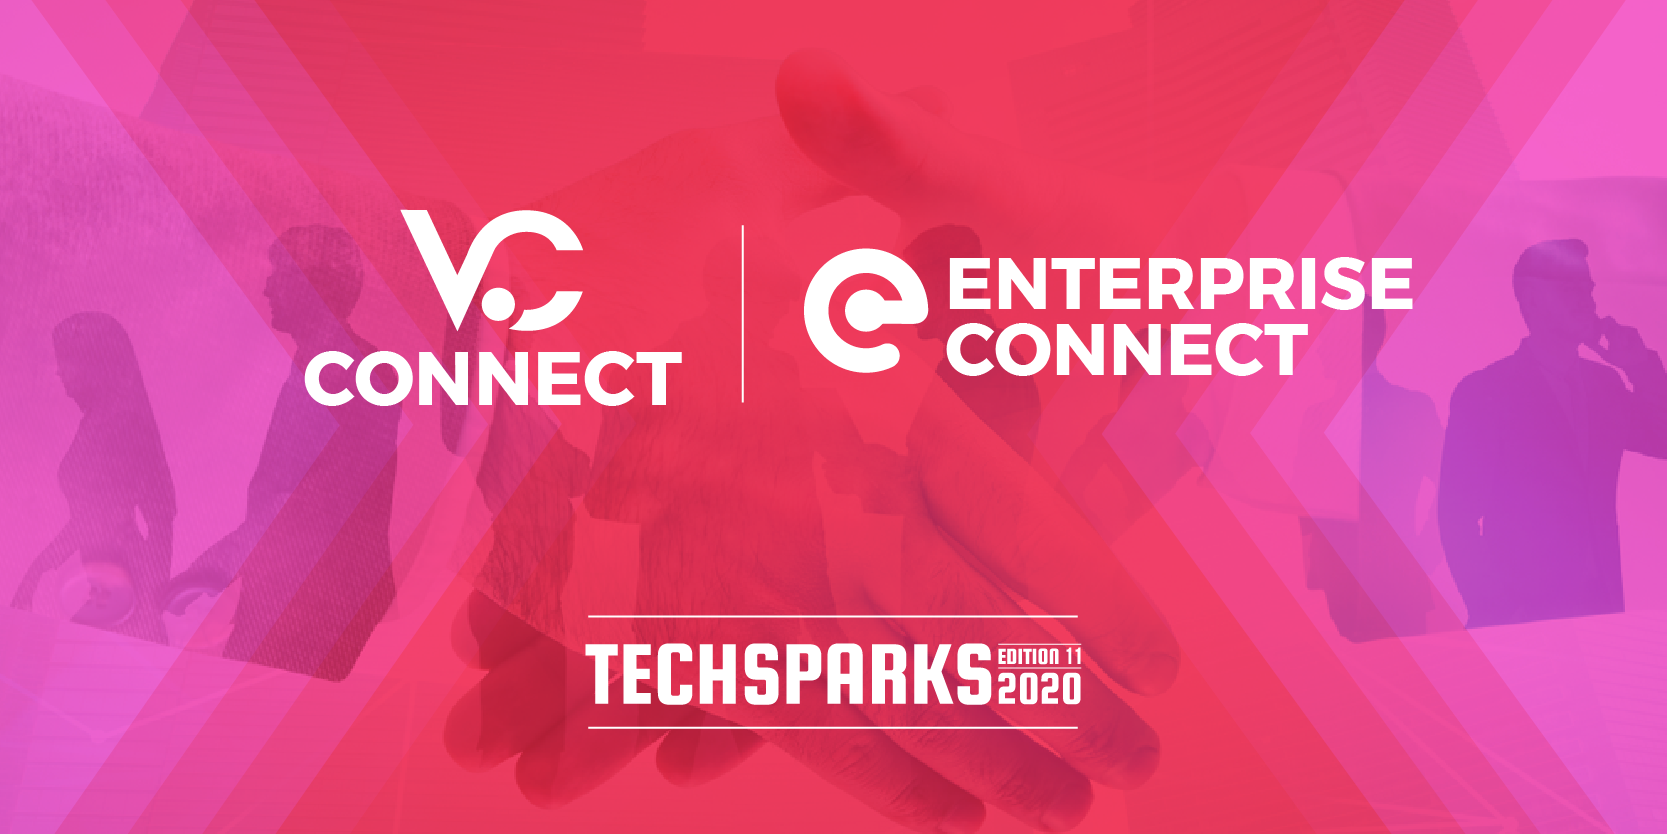 [TechSparks 2020] The all-new VC Connect and Enterprise Connect tracks at India's largest startup-tech conference